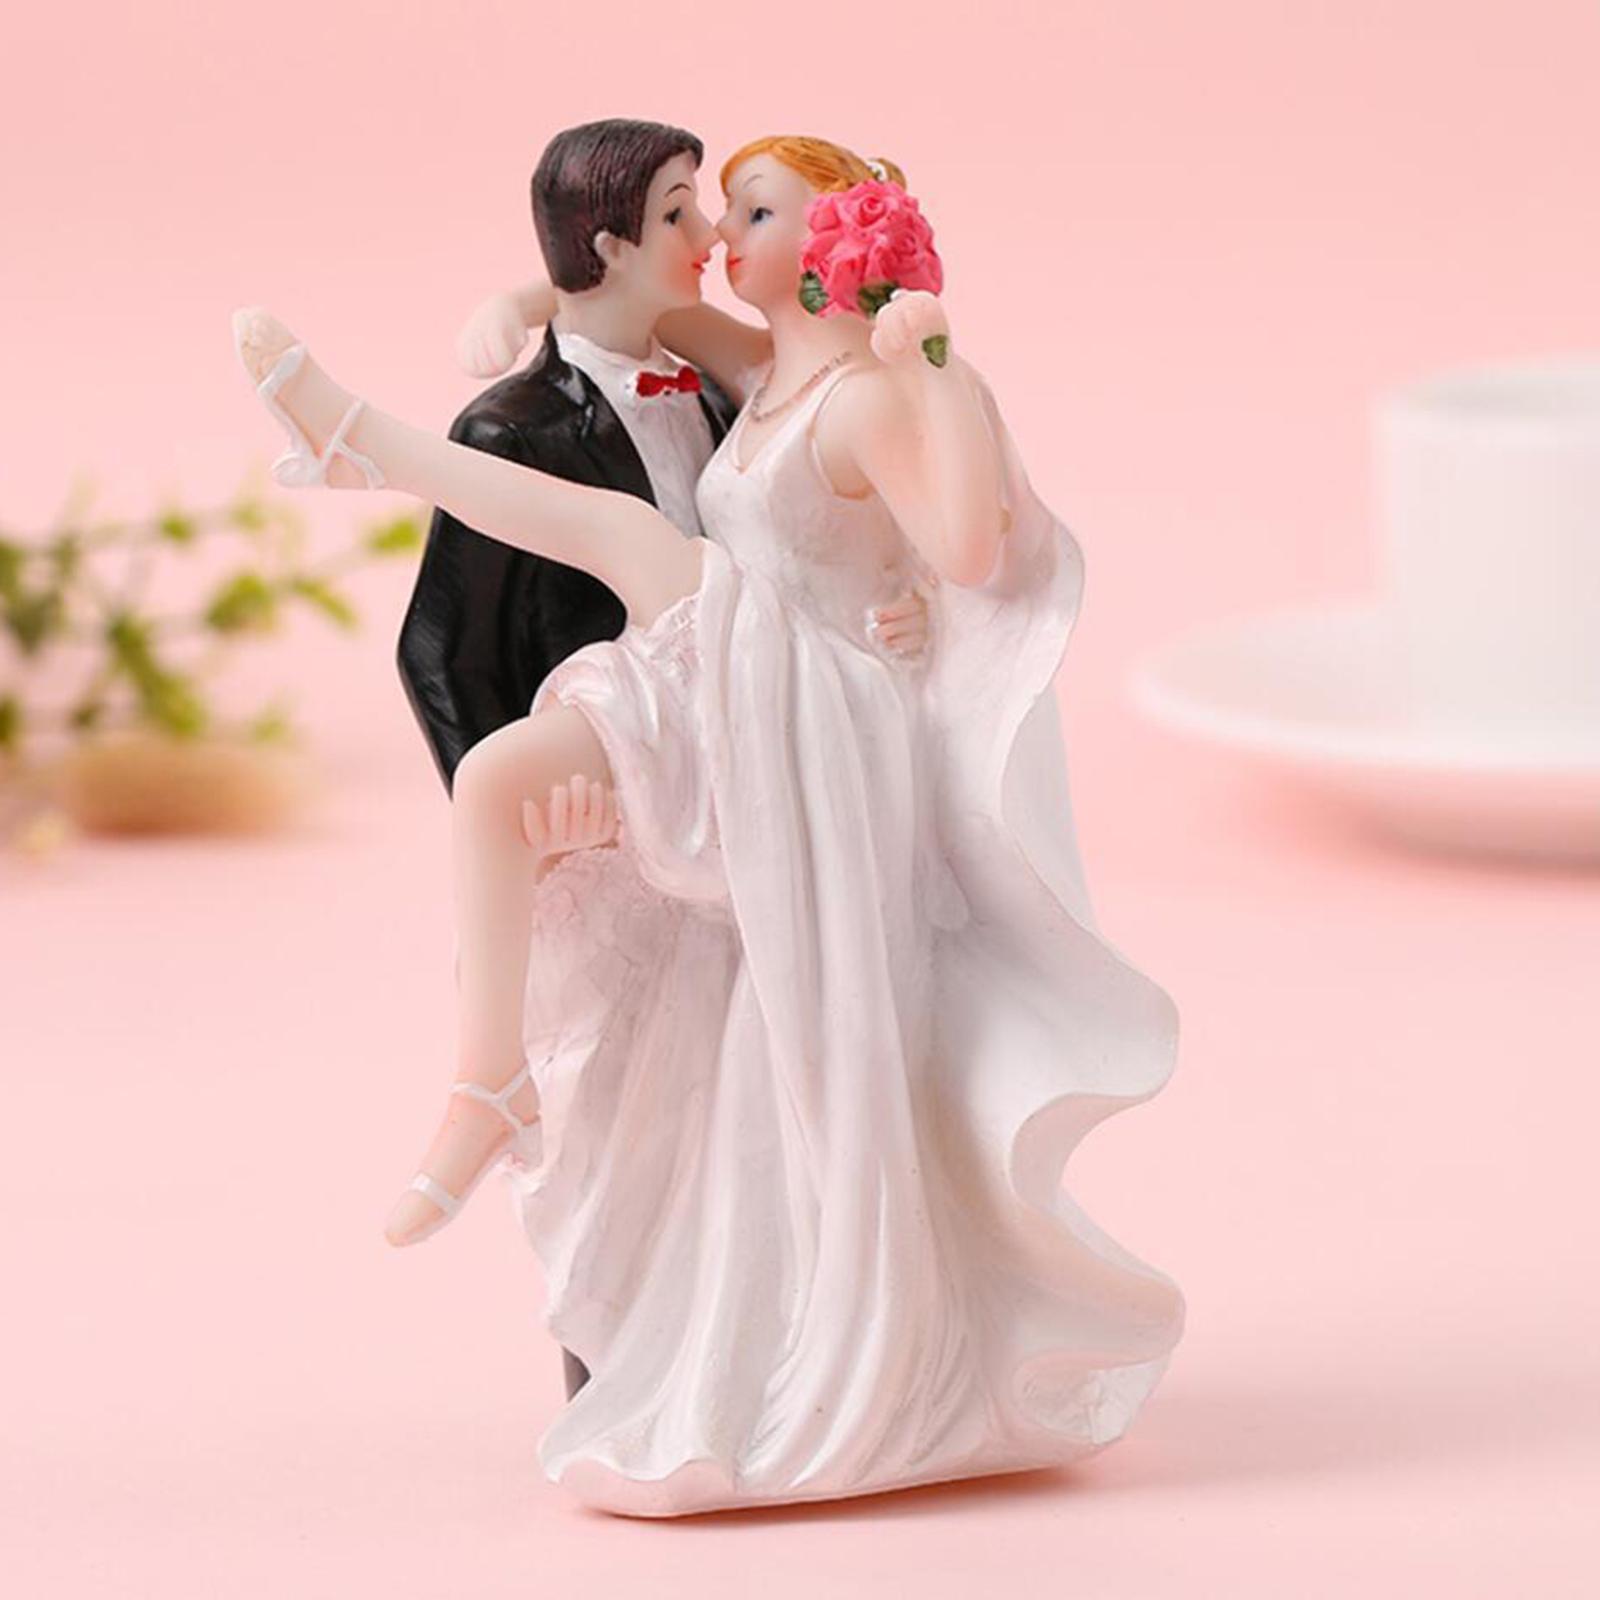 Wedding Cake Topper Couple Figures for Engagement Bride Shower Anniversary